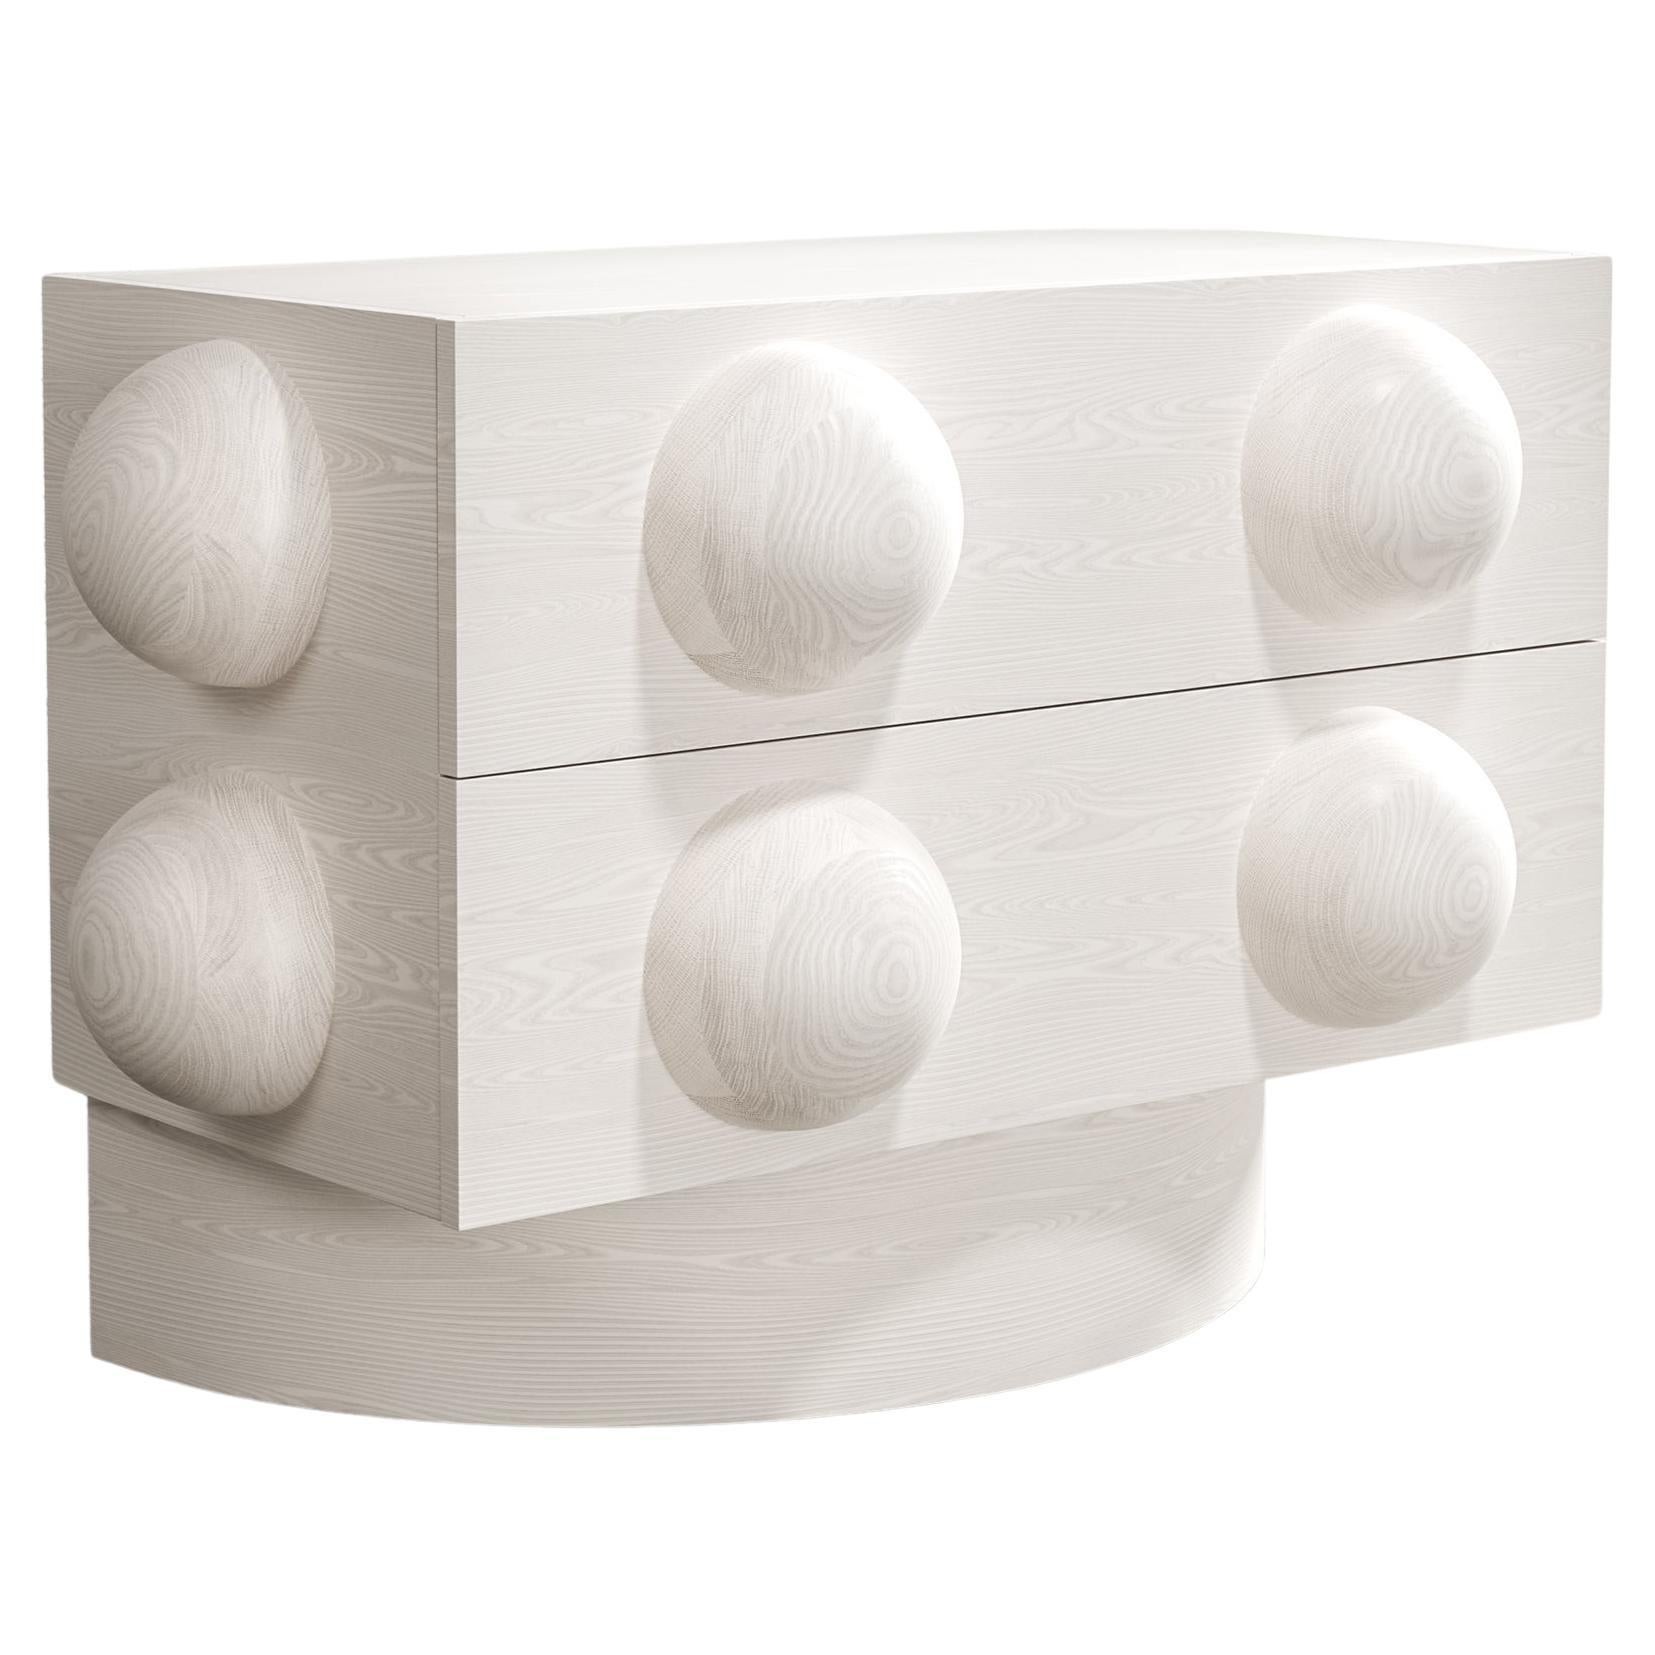 DOT NIGHTSTAND - Modern Bleached White Oak Body and Base For Sale